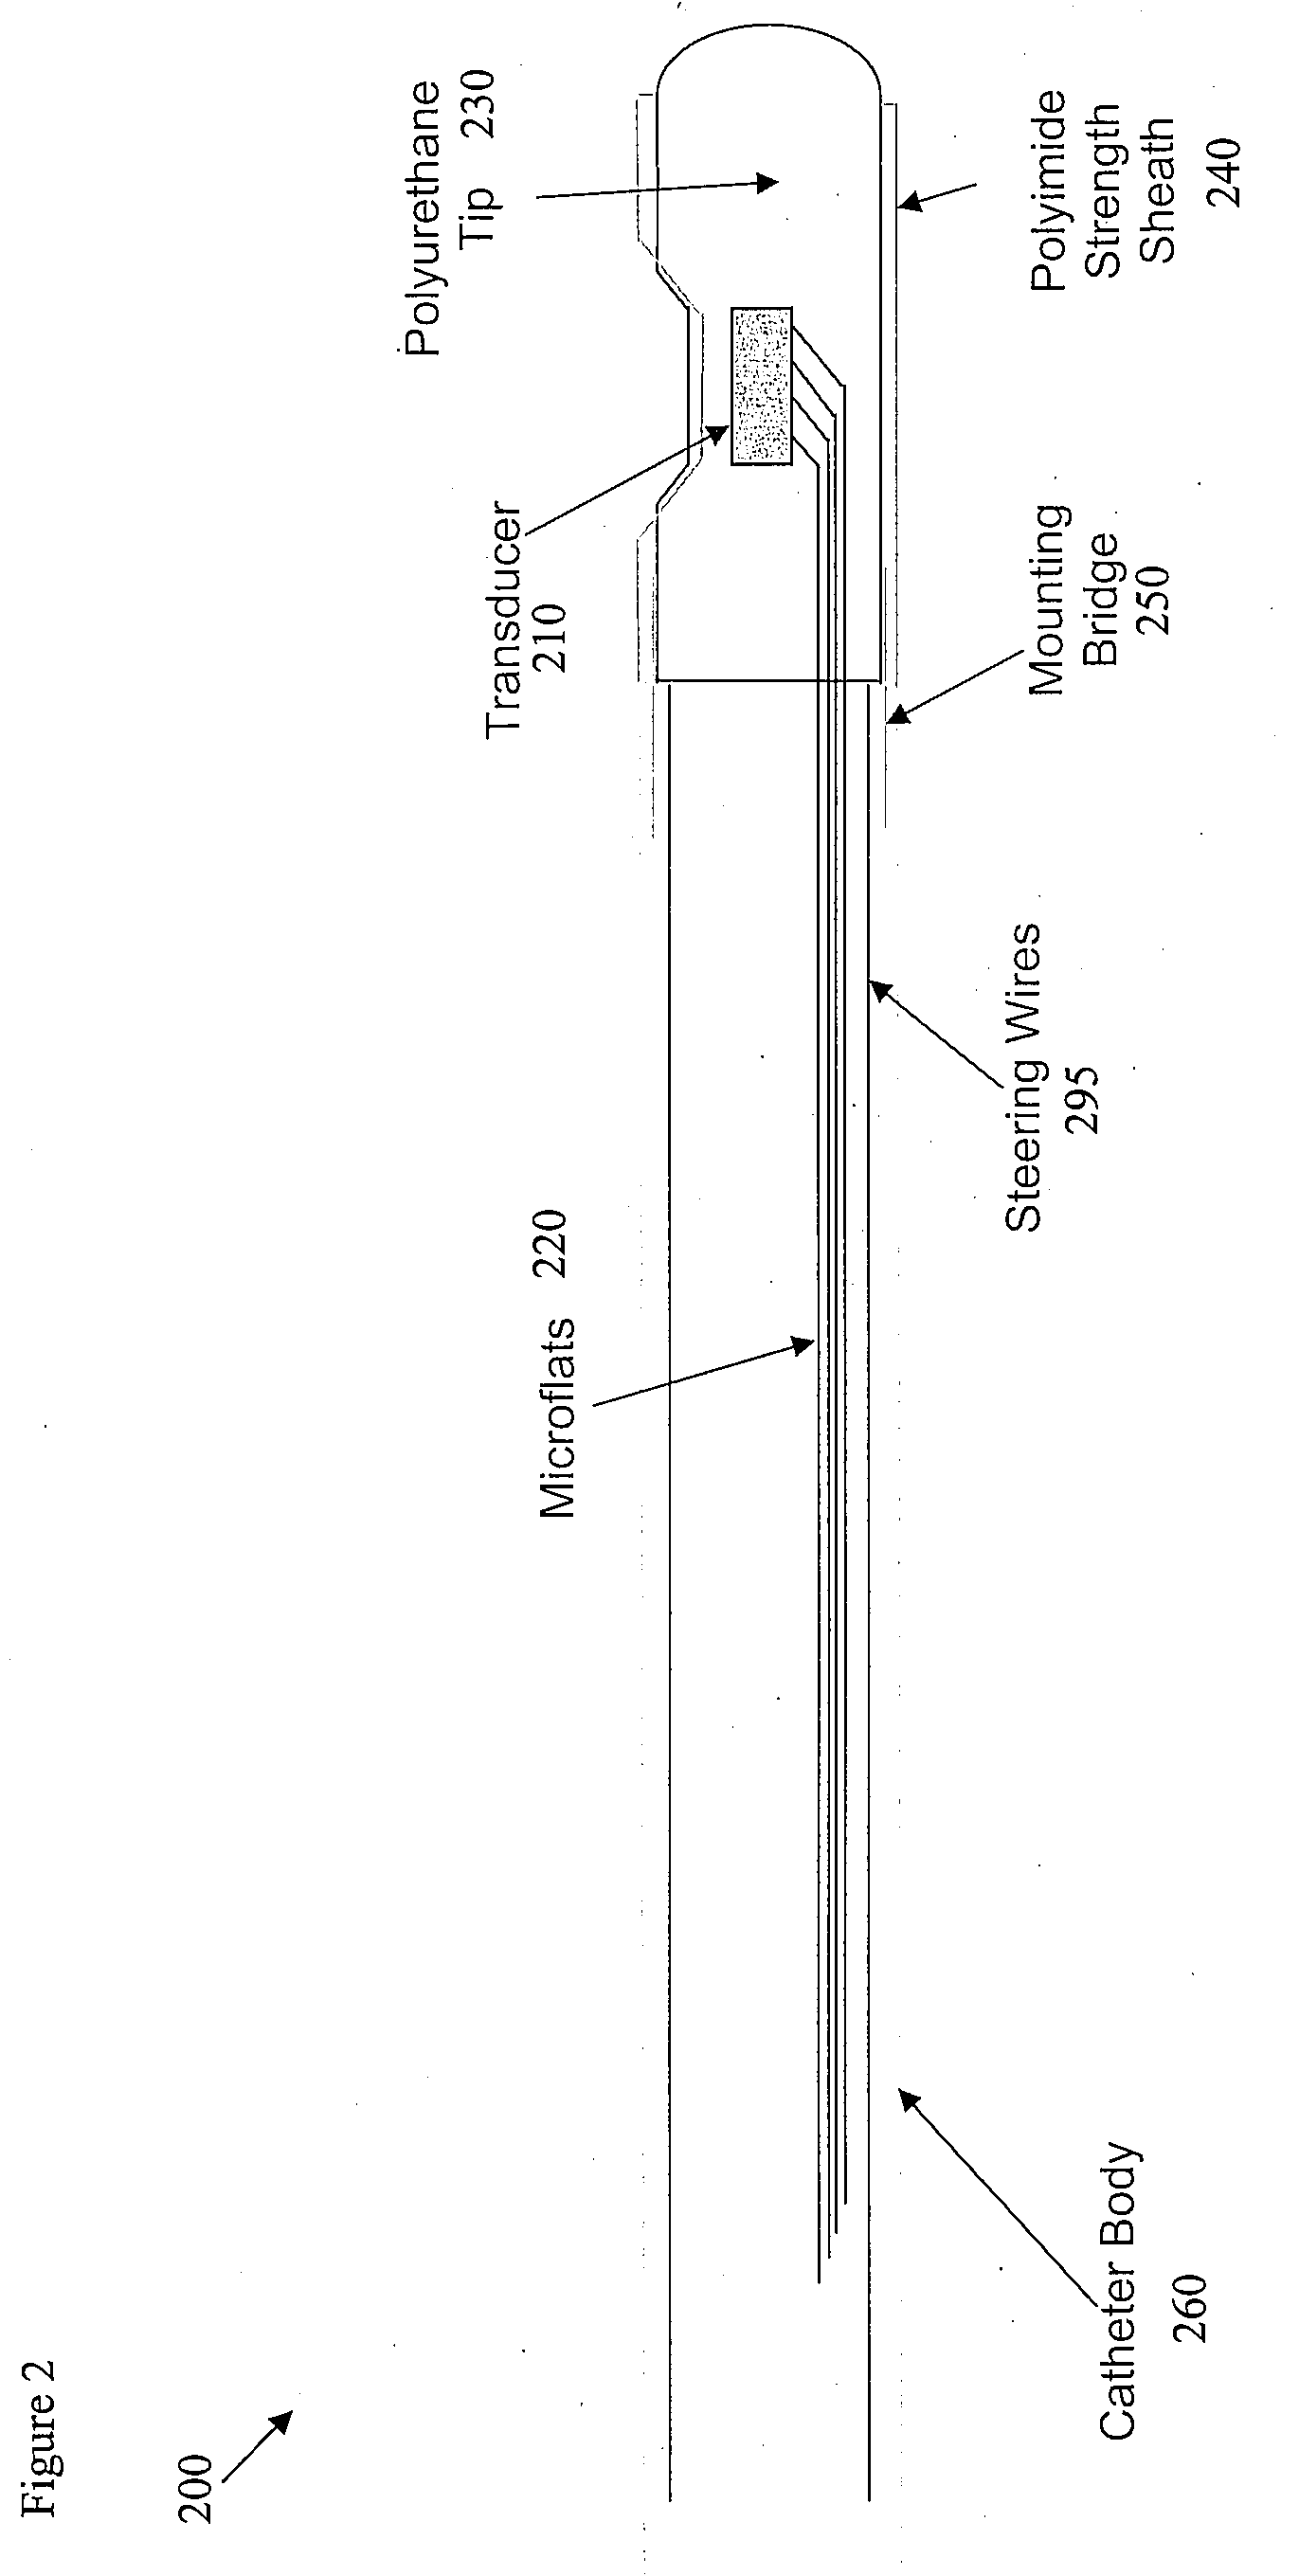 Four-Way Steerable Catheter System and Method of Use